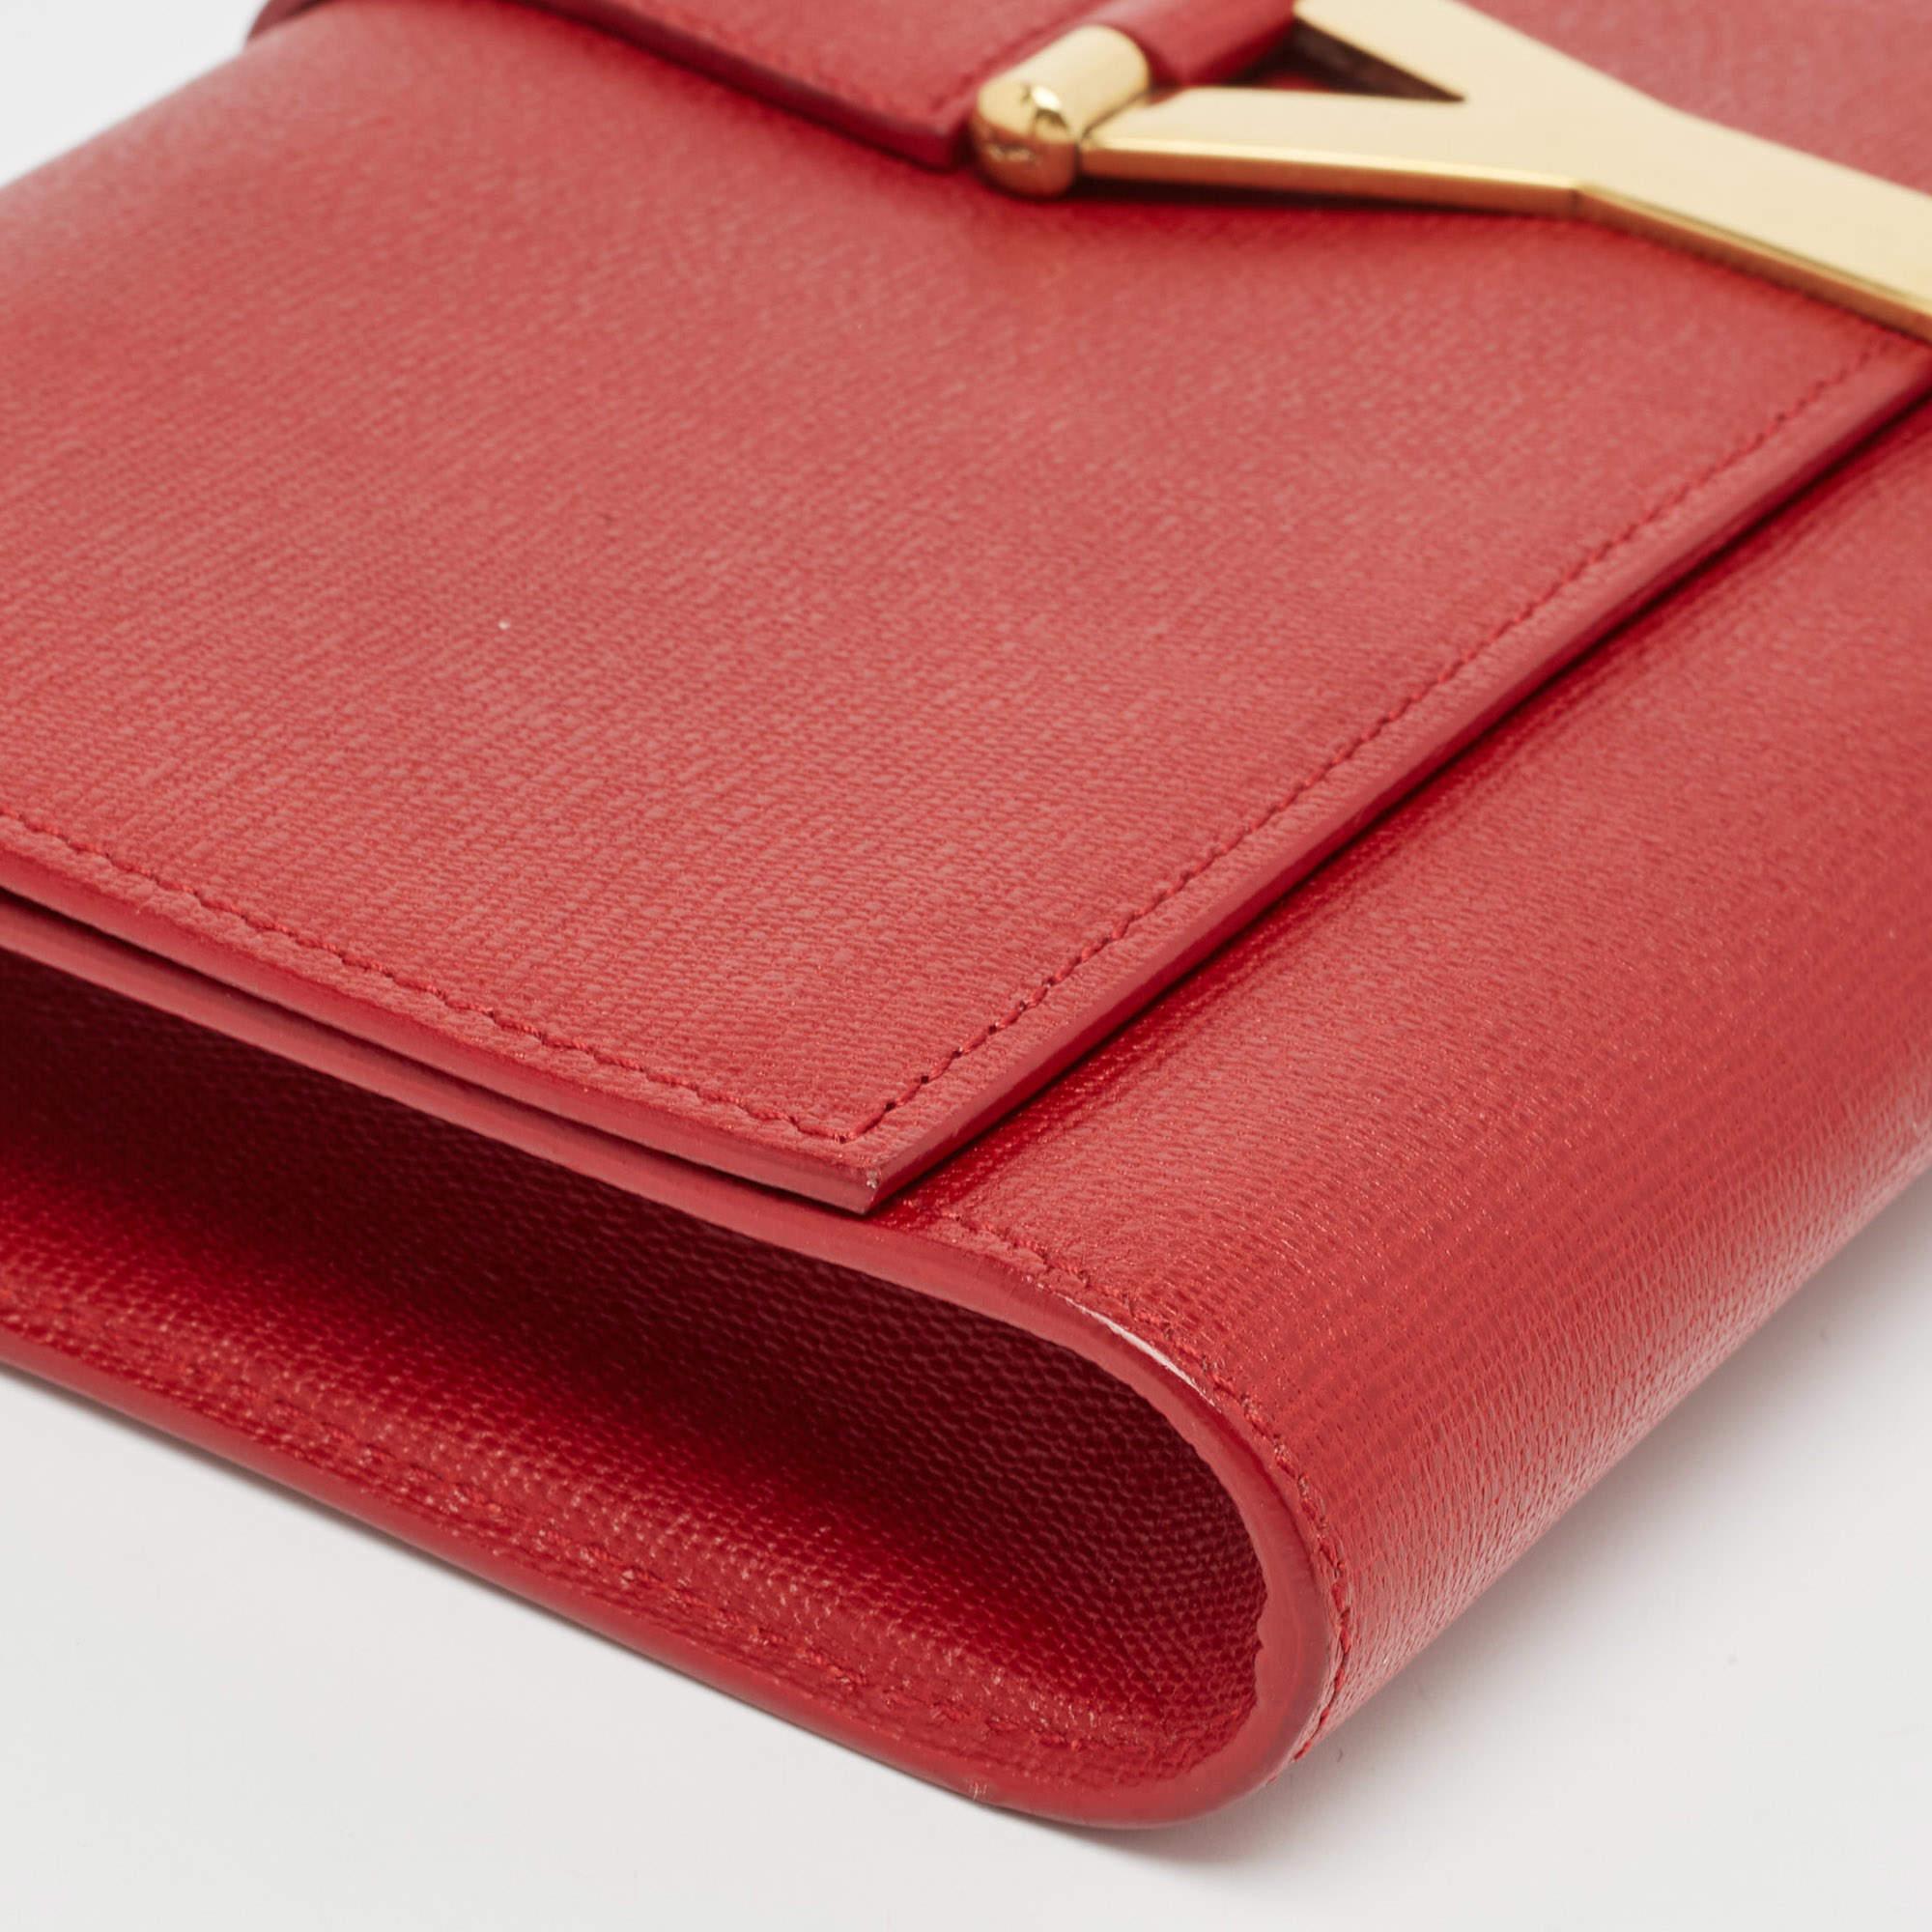 Yves Saint Laurent Red Leather Y-Ligne Clutch For Sale 7